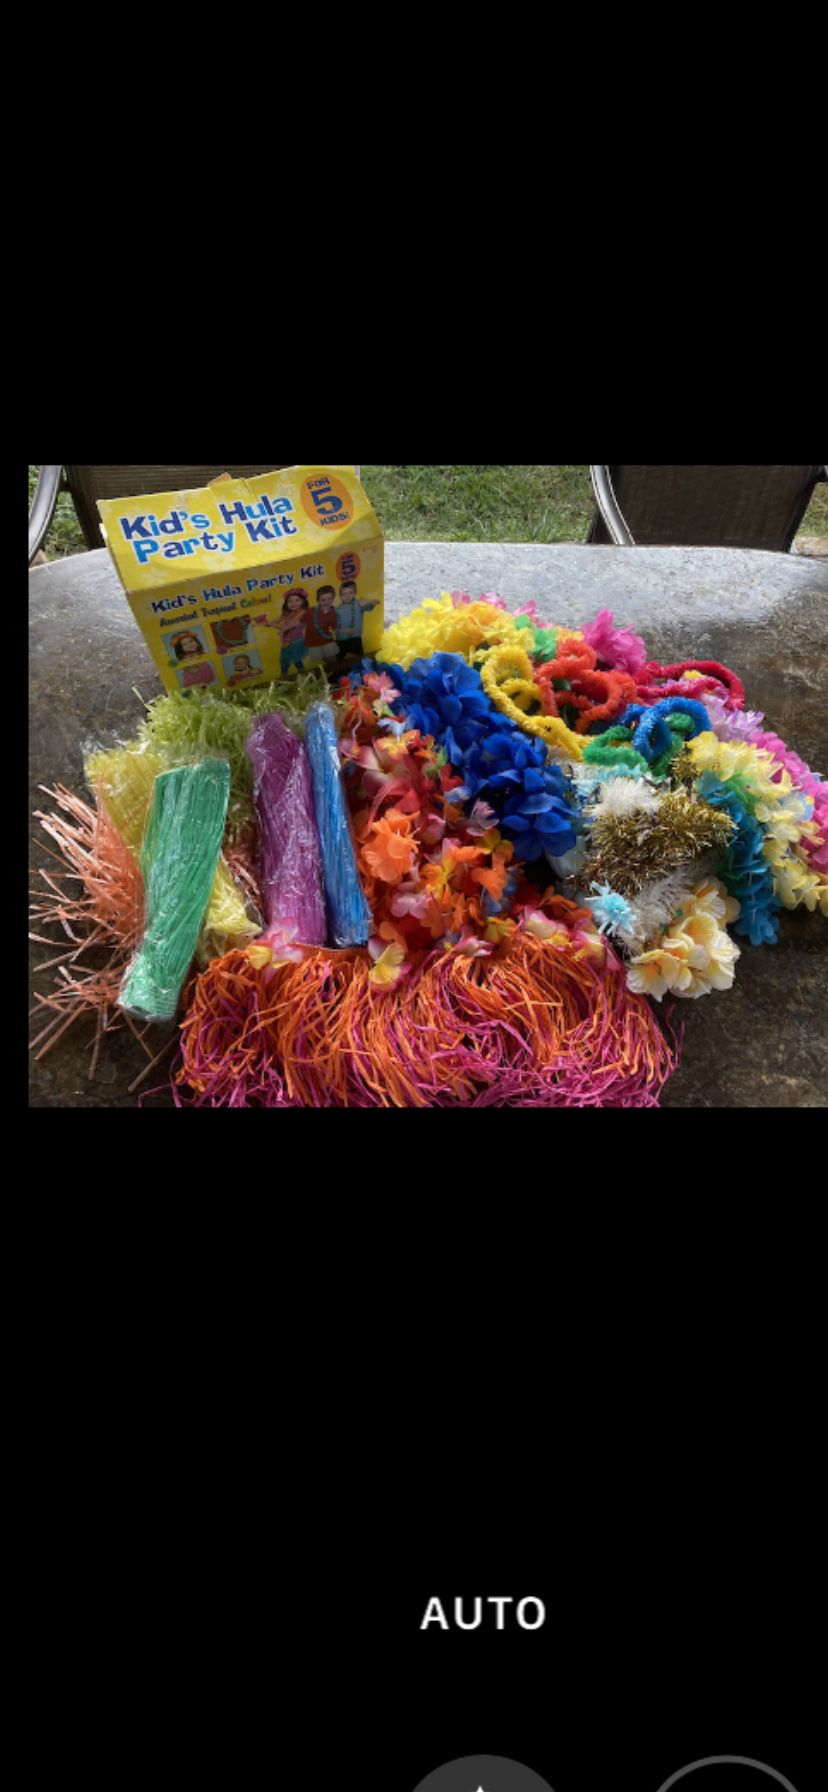 Huge Wholesale Clearance Lot of Hawaiian Hula Party accessories Extra PCs Luau decorations kids straw skirts flowers lays wristlets and more!!!